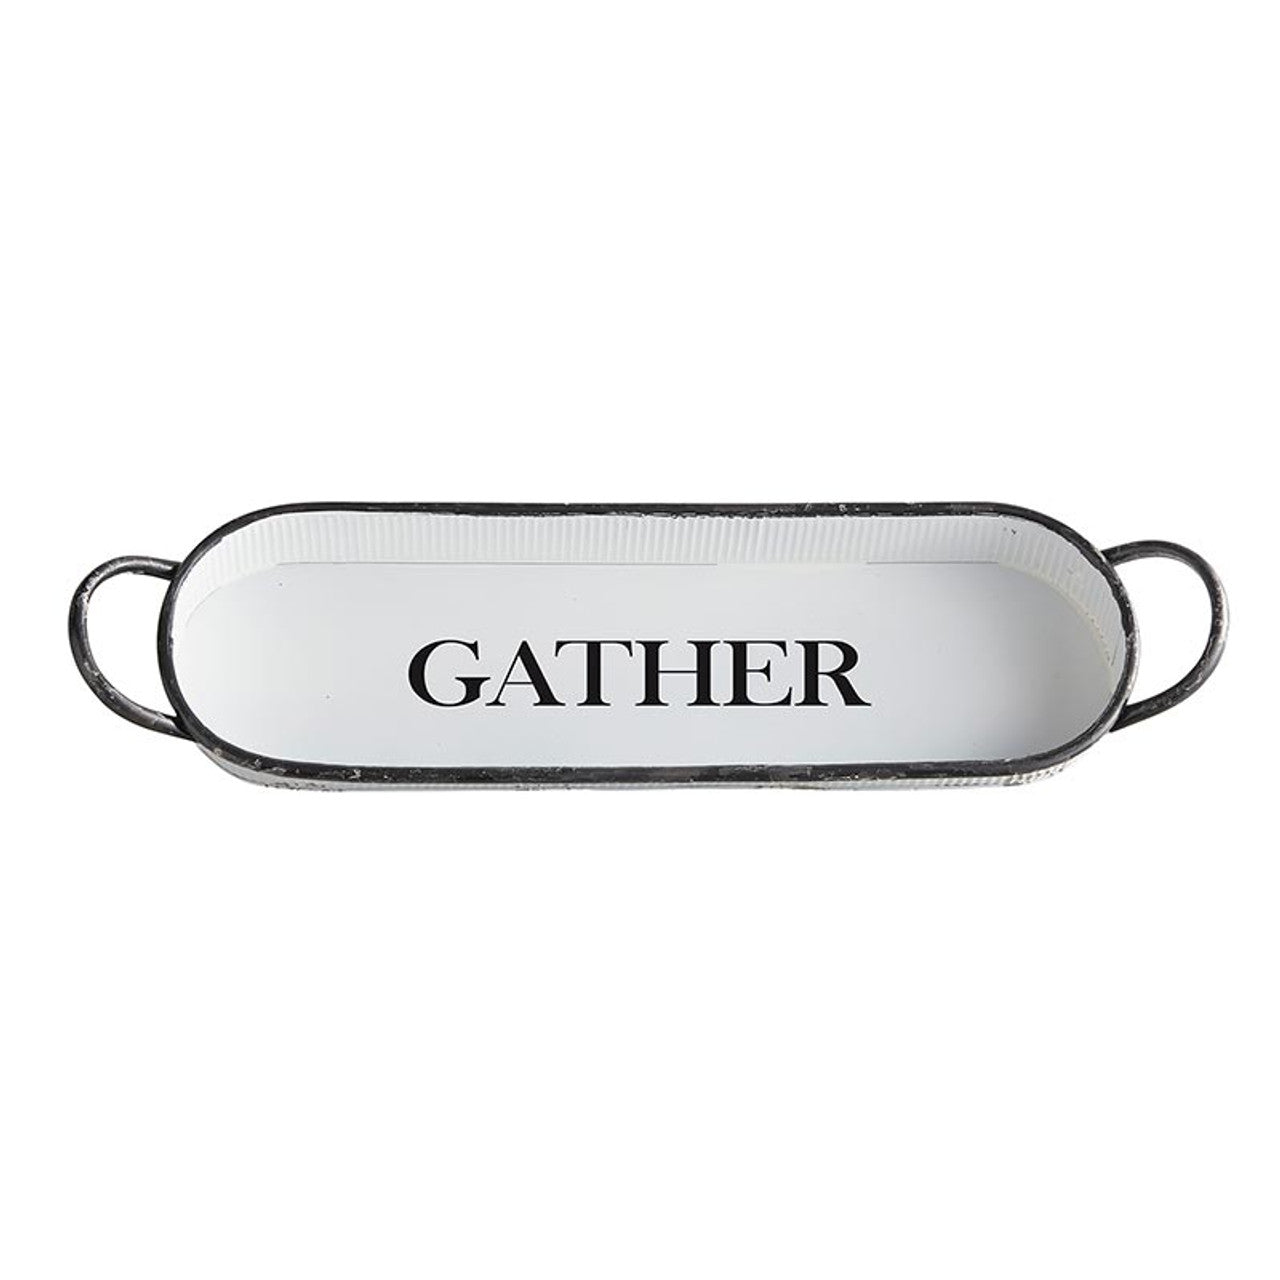 Gather Oval Tray | Decorative Metal Rustic Serving Tray | 20" x 6.5"